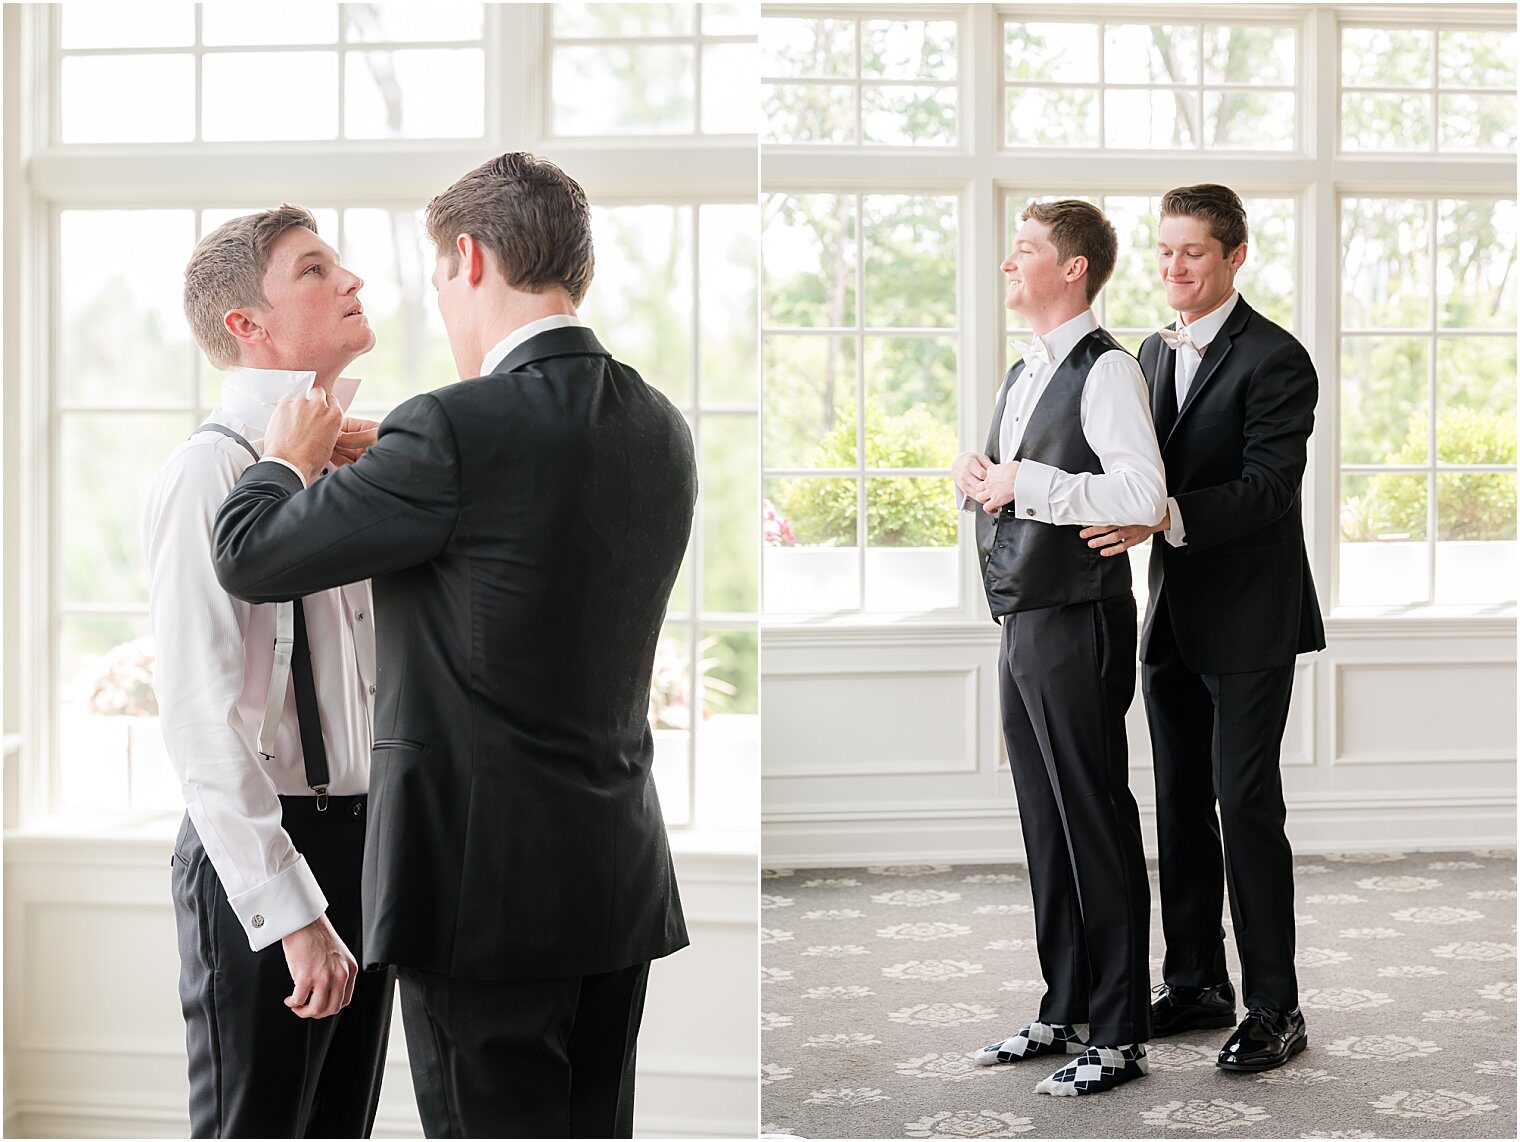 Groom getting ready helped by his brother